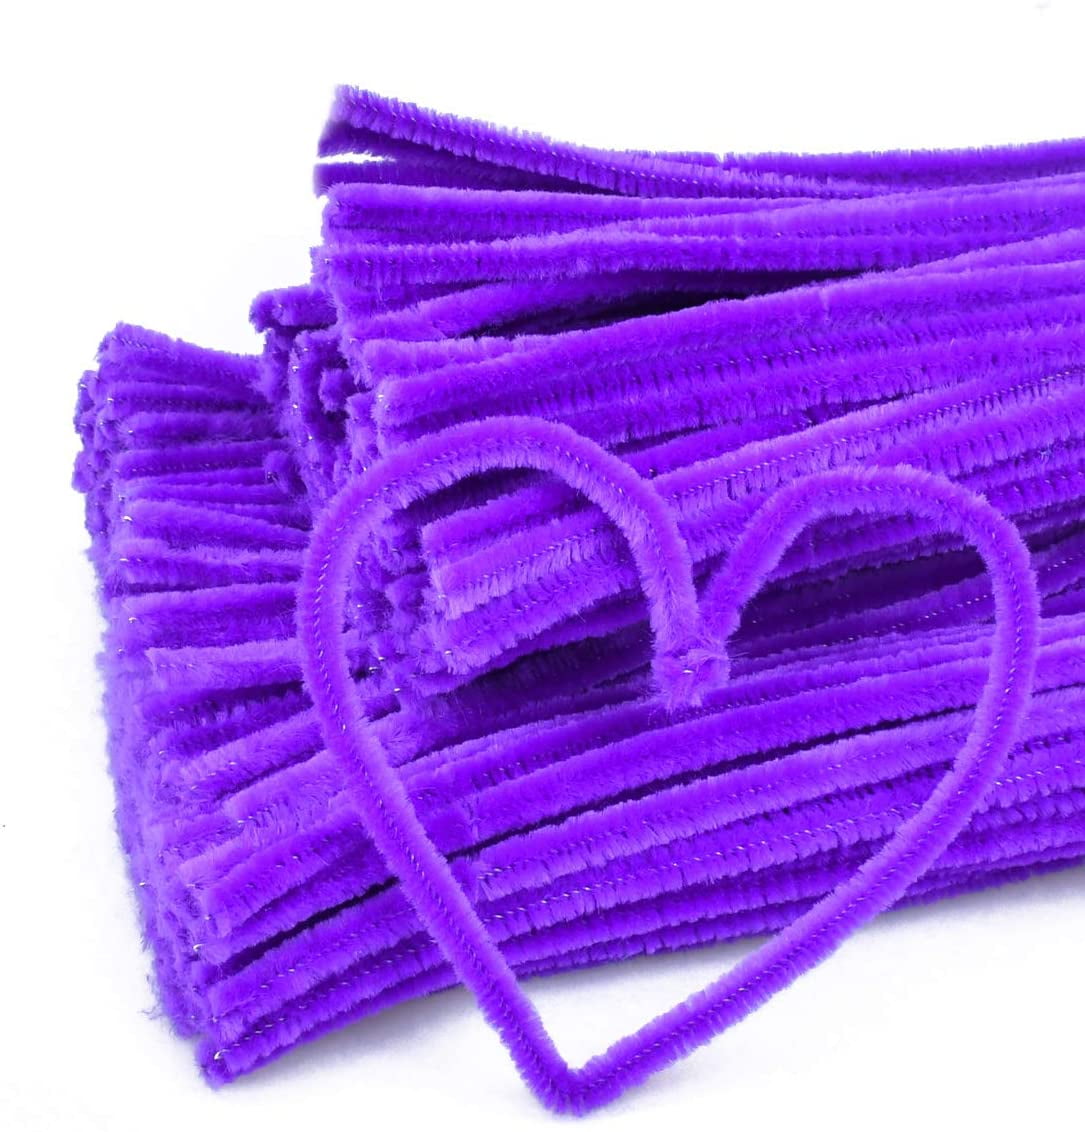 6mm wide 10-1000 LIGHT PURPLE chenille craft stems pipe cleaners 30cm long 